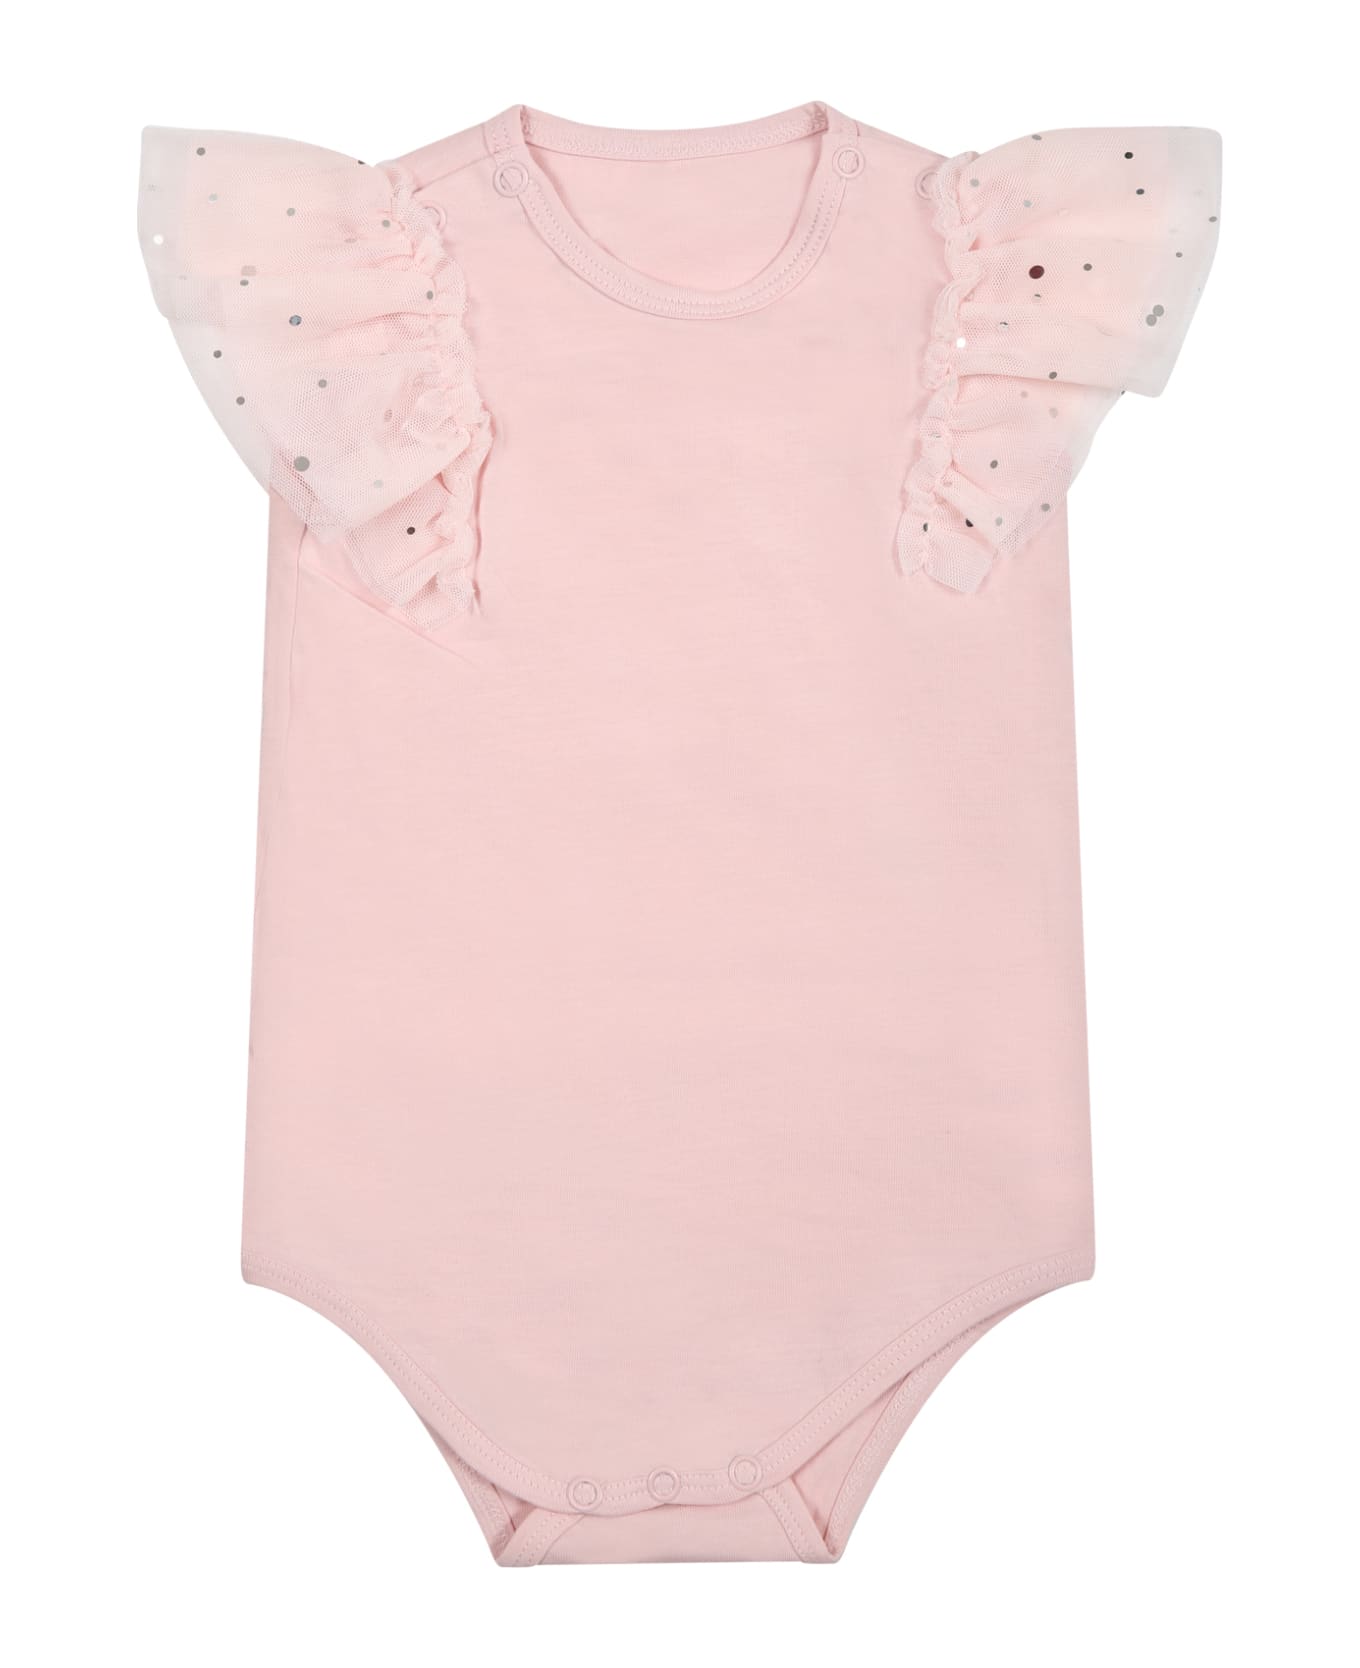 Stella McCartney Kids Pink Bodysuit For Baby Girl With Sequins - Pink